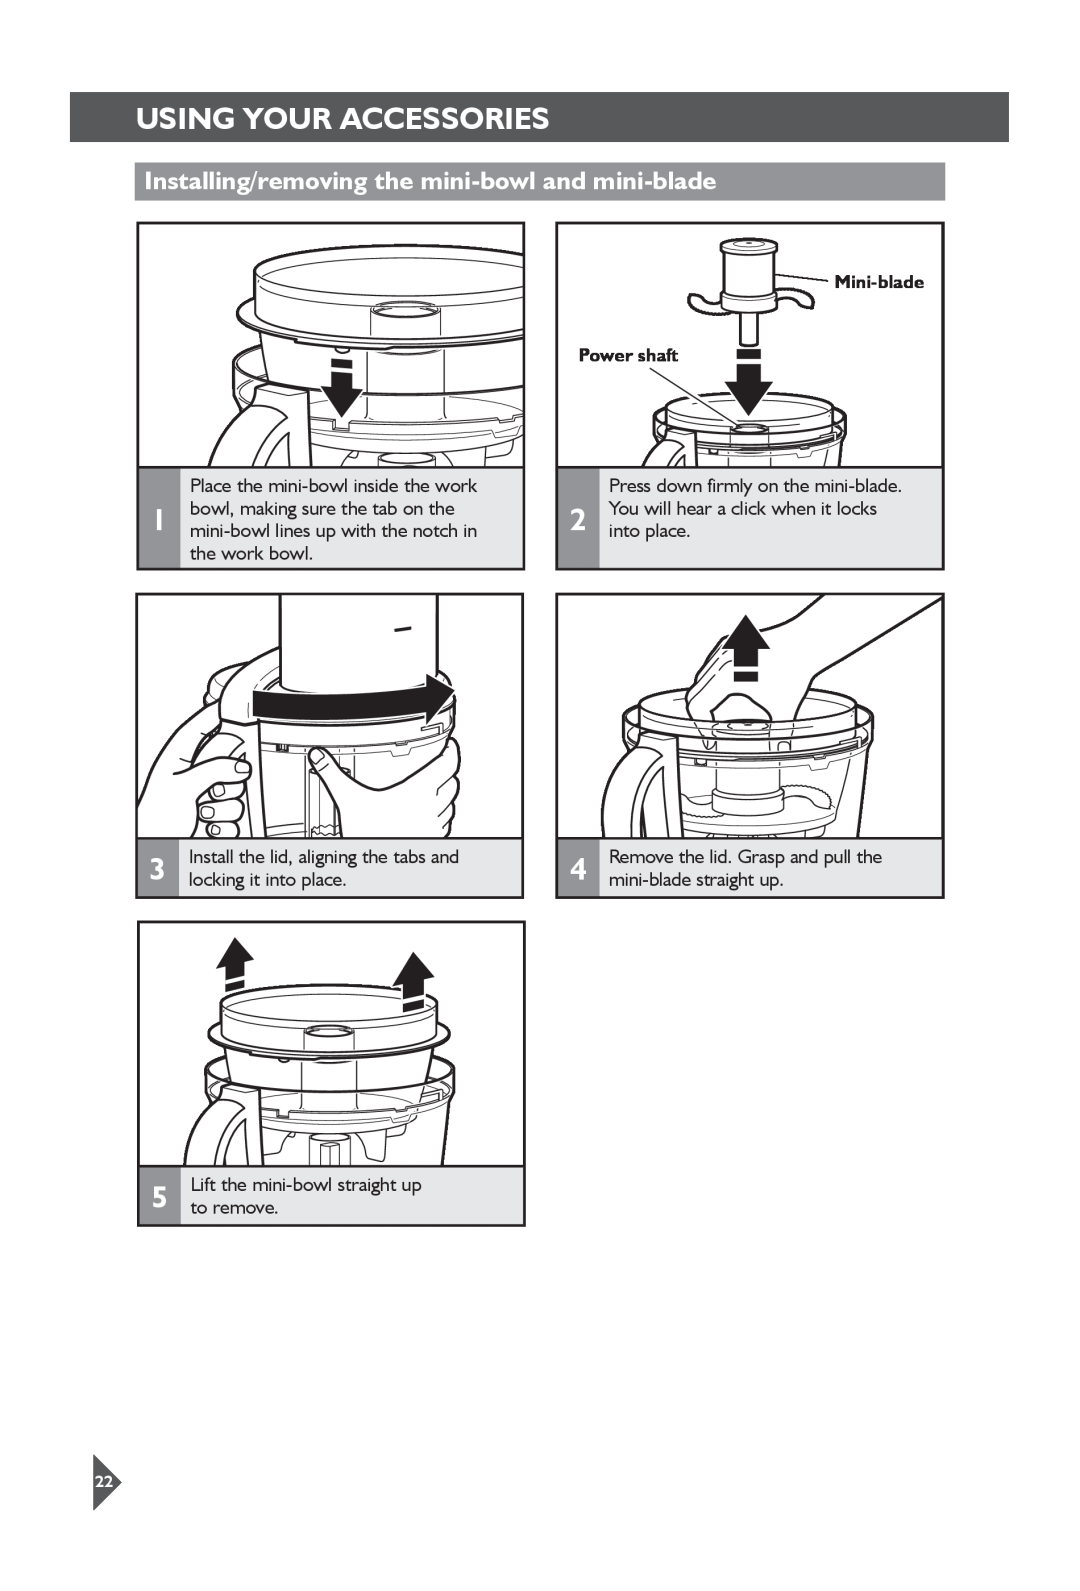 KitchenAid 5KFP1644 manual Installing/removing the mini-bowl and mini-blade, Mini-blade Power shaft, Using Your Accessories 